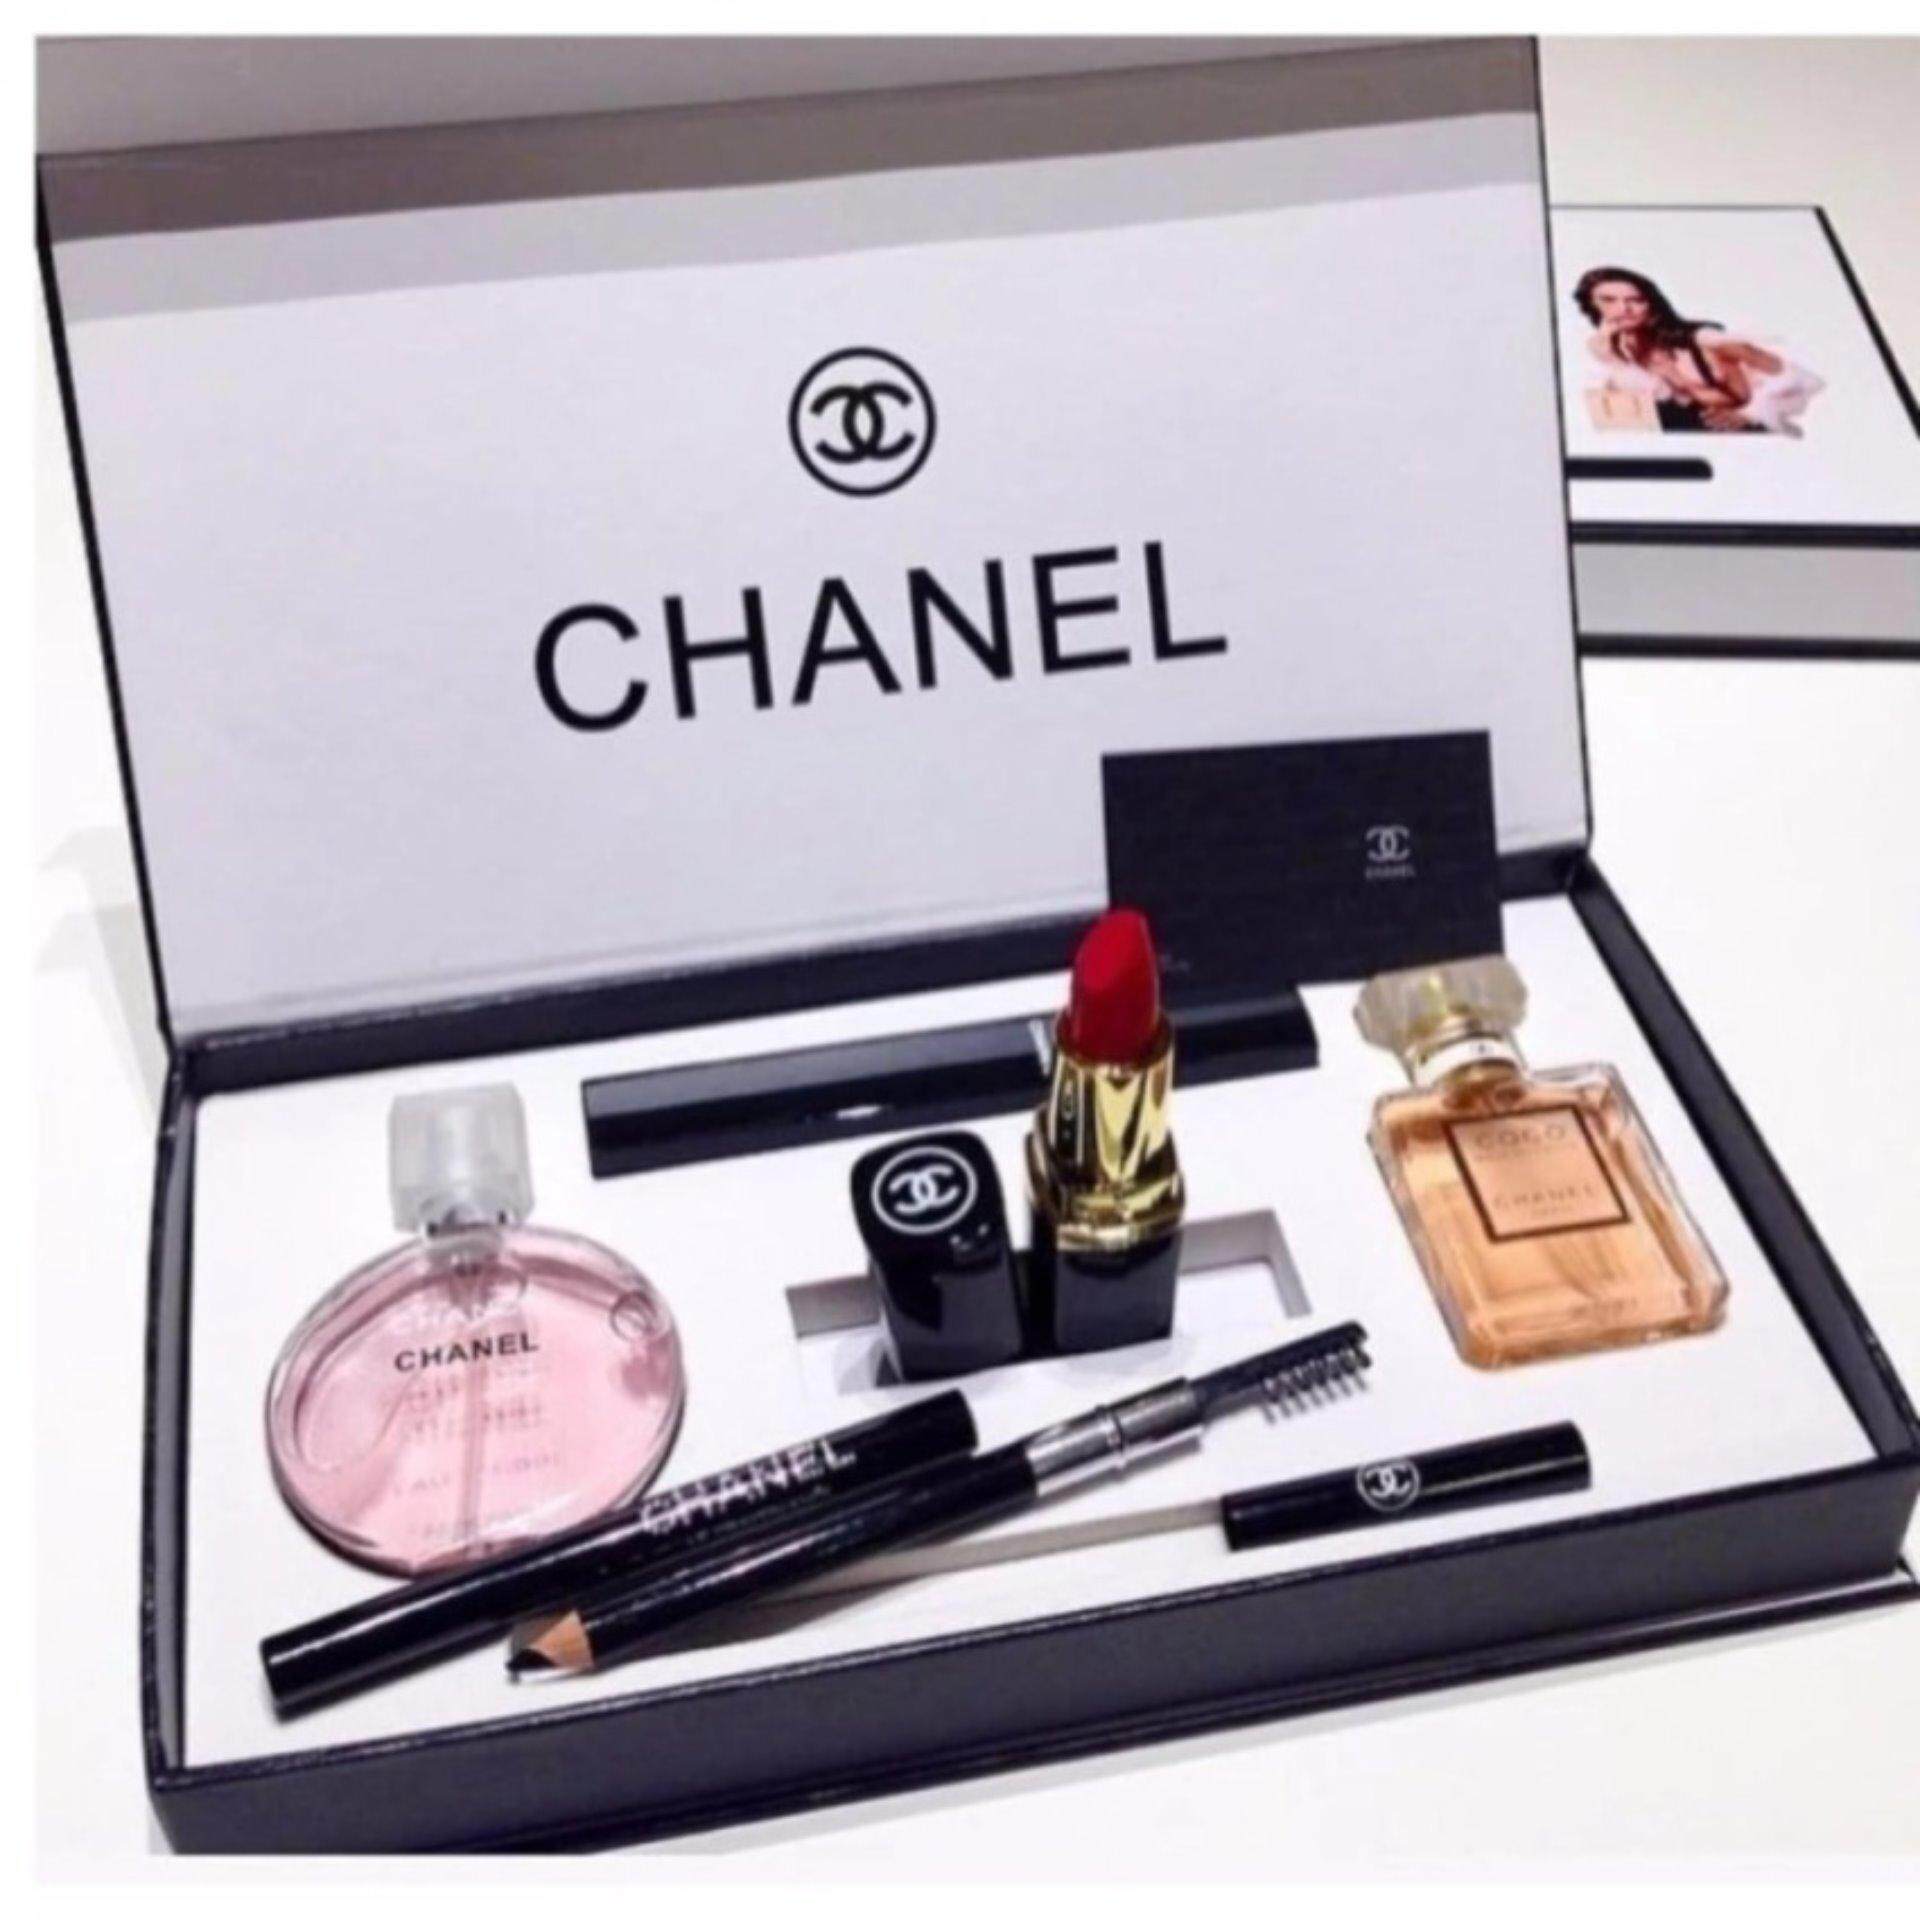 Chanel 5 in 1 Limited Edition Gift set- Chance Chanel 15ml Perfume